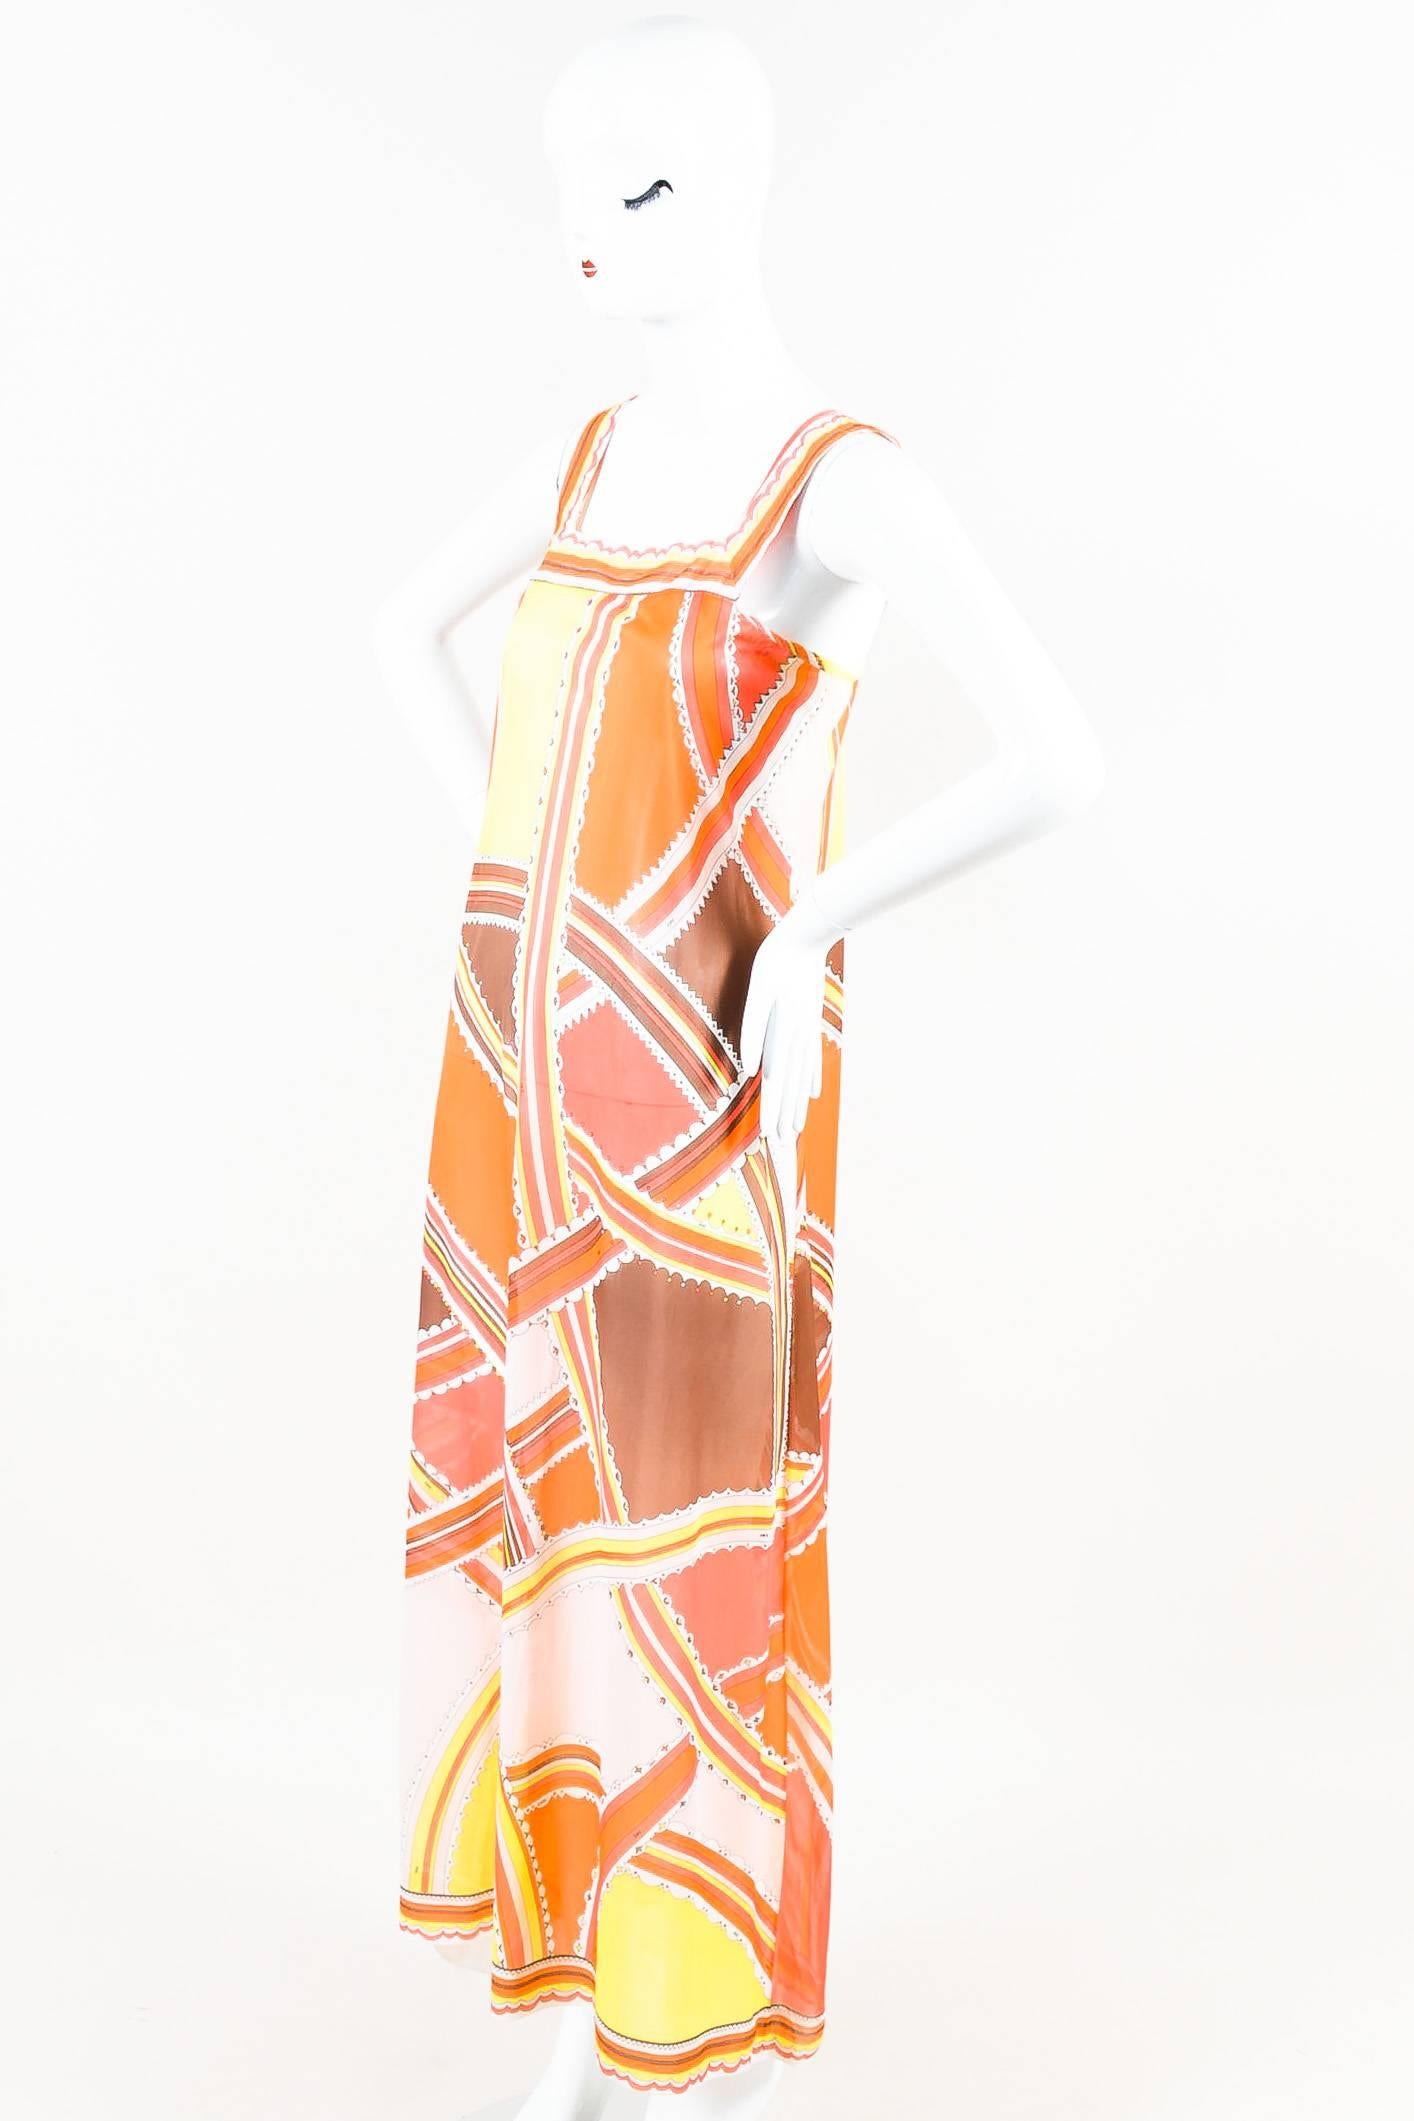 Lightweight, sheer jersey flowy maxi dress with multicolor abstract print. Sleeveless. Square neckline. Hits at feet. Pulls on. Unlined.

Additional Measurements:
Shoulder -to- Shoulder: 10.625"